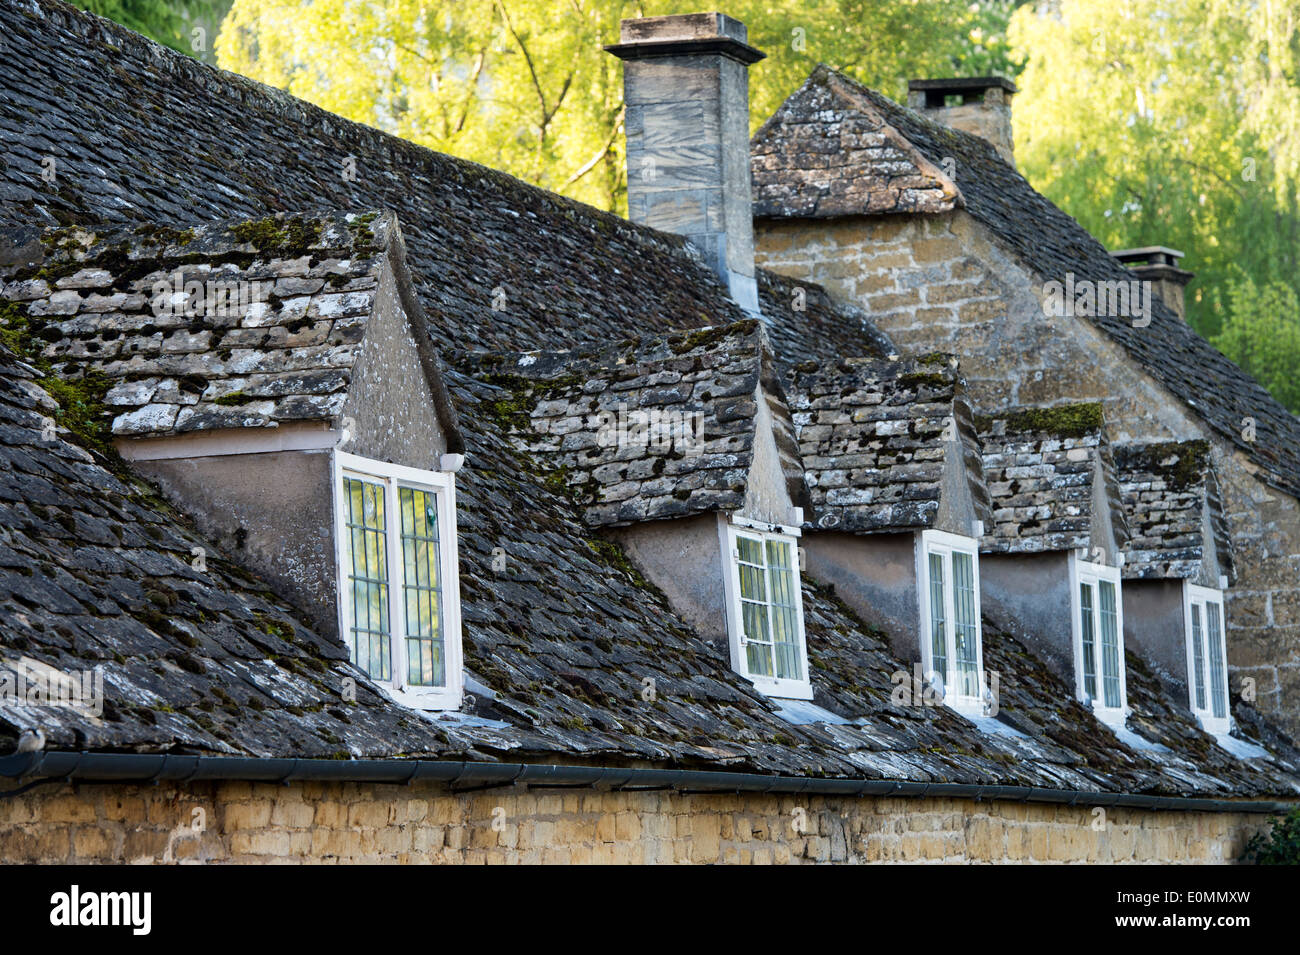 Old Dormer Windows and tiled roof on Cotswold cottages in Snowshill. Cotswolds, Gloucestershire, England Stock Photo